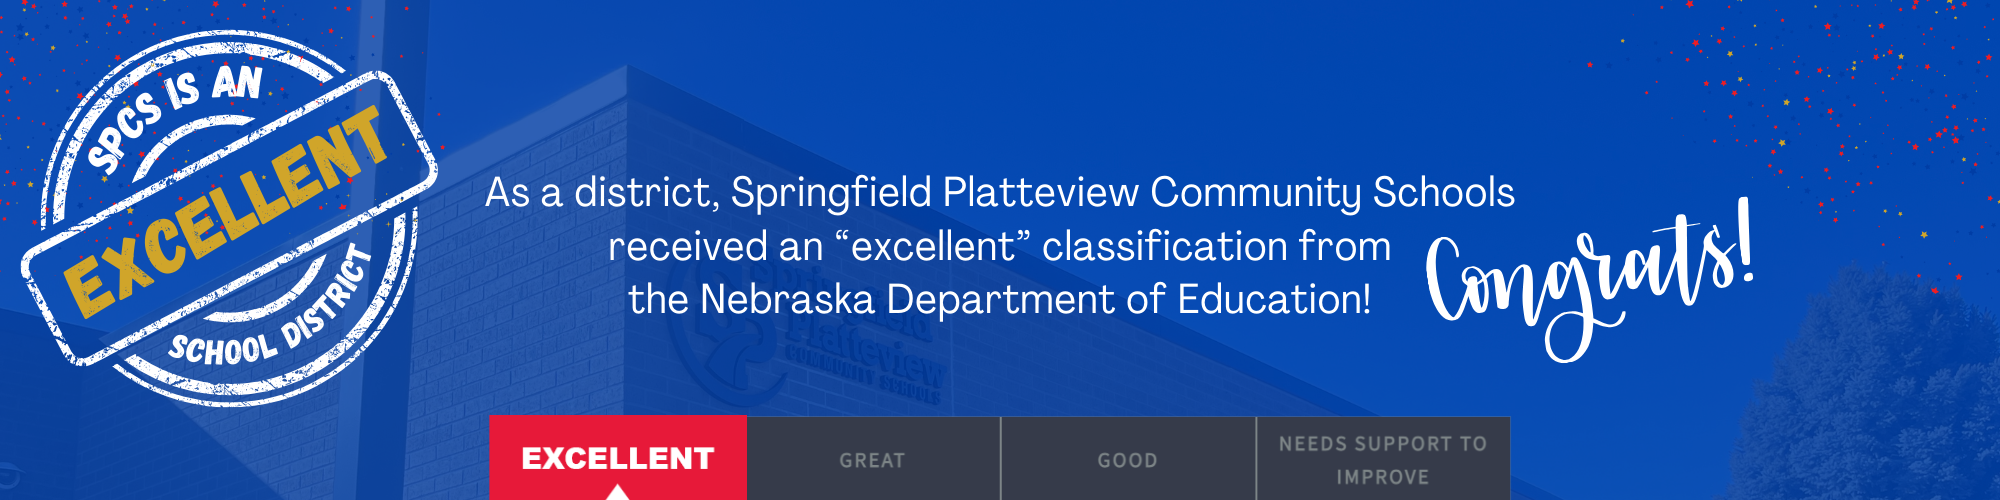 As a district, Springfield Platteview Community Schools received an 